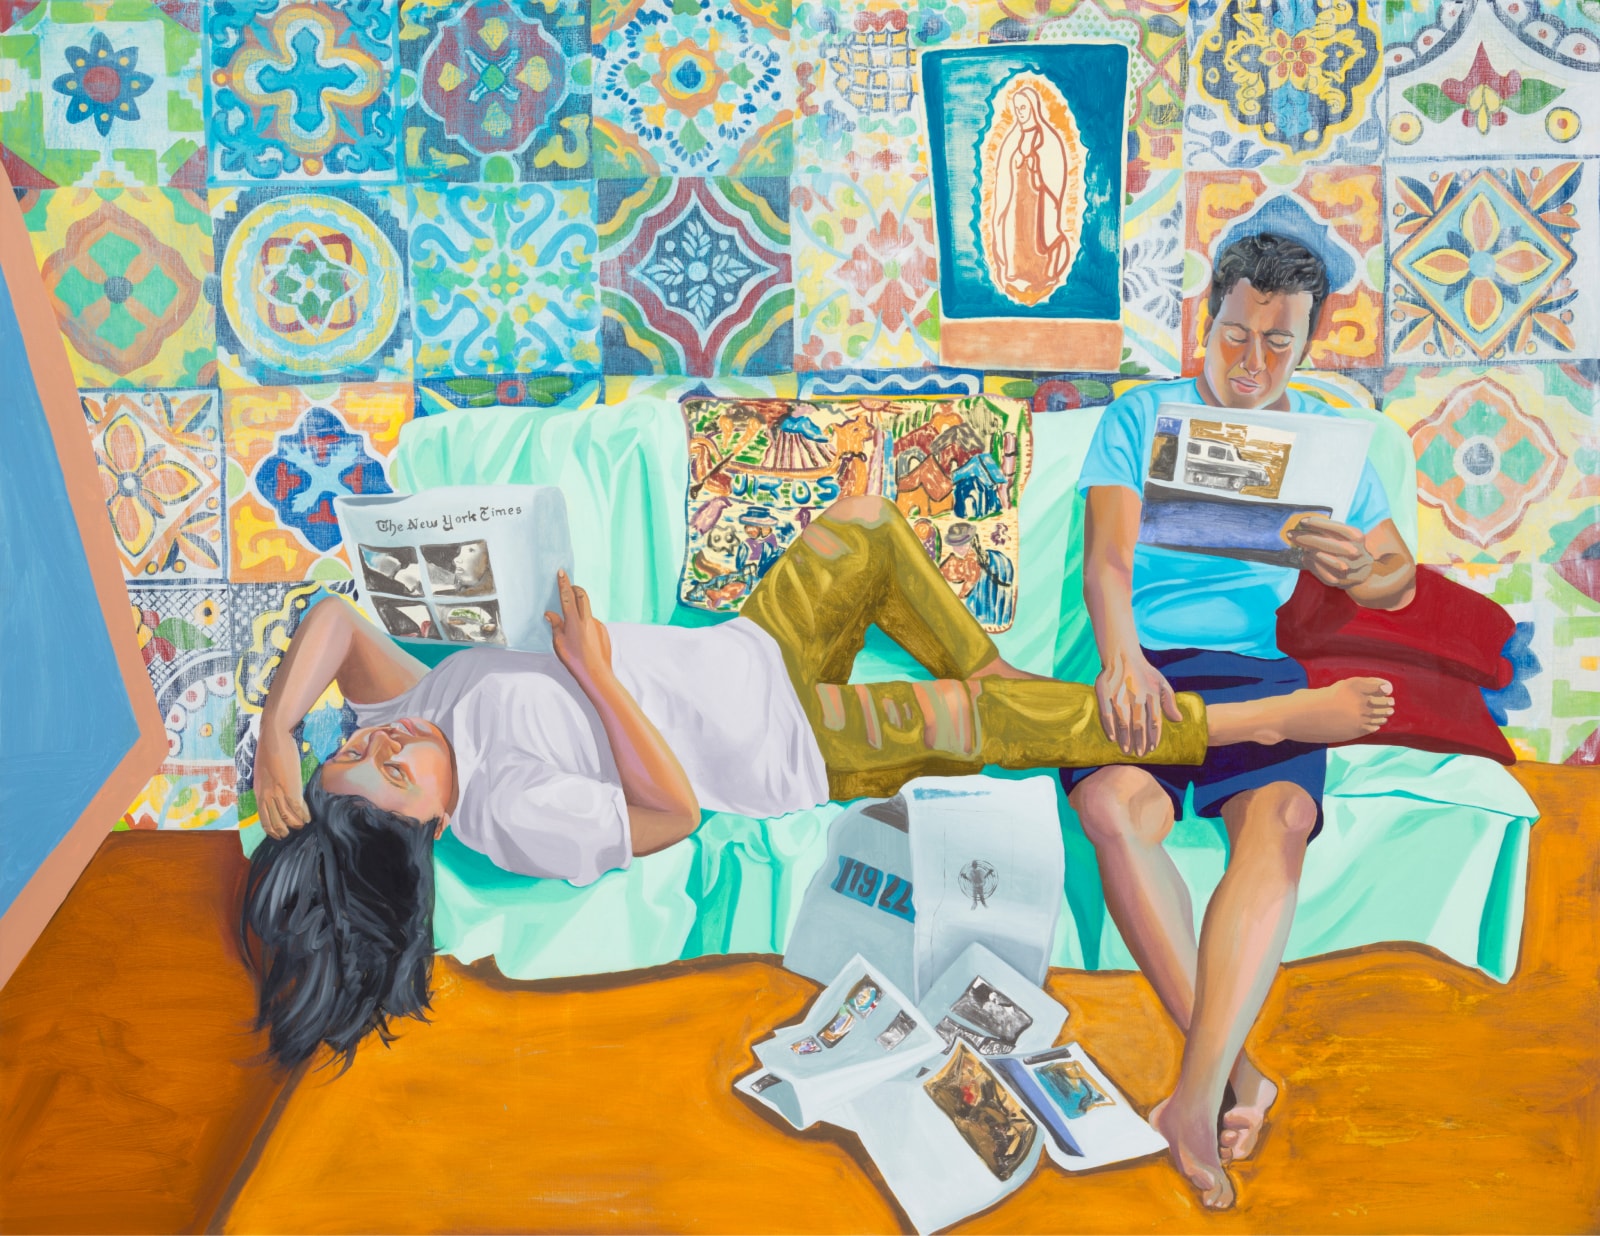 Artwork with a woman lying on a couch with her feet in a man’s lap, each reading the newspaper